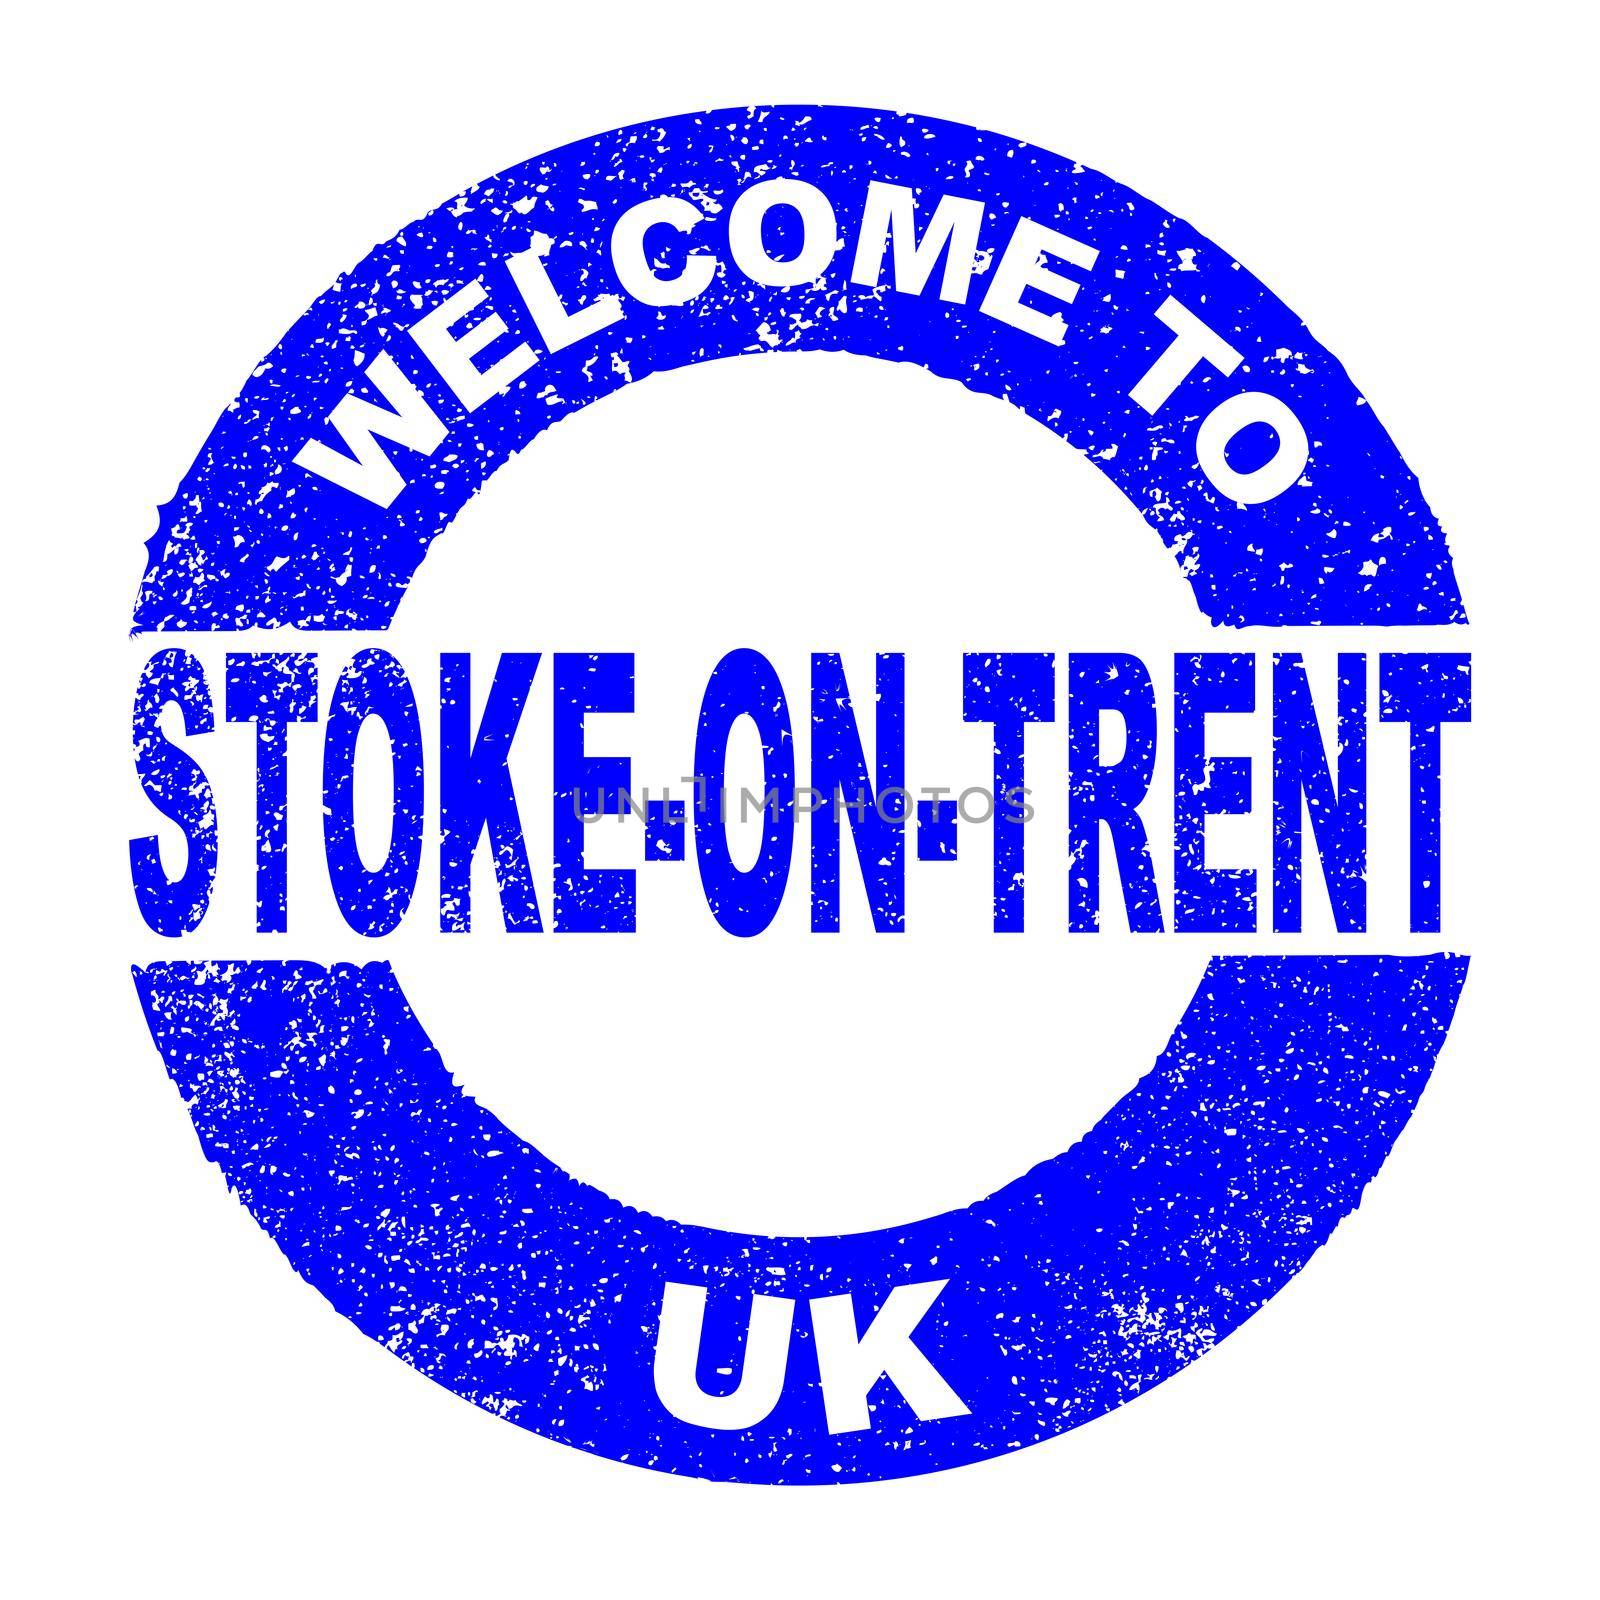 A grunge rubber ink stamp with the text Welcome To Stoke on Trent UK over a white background